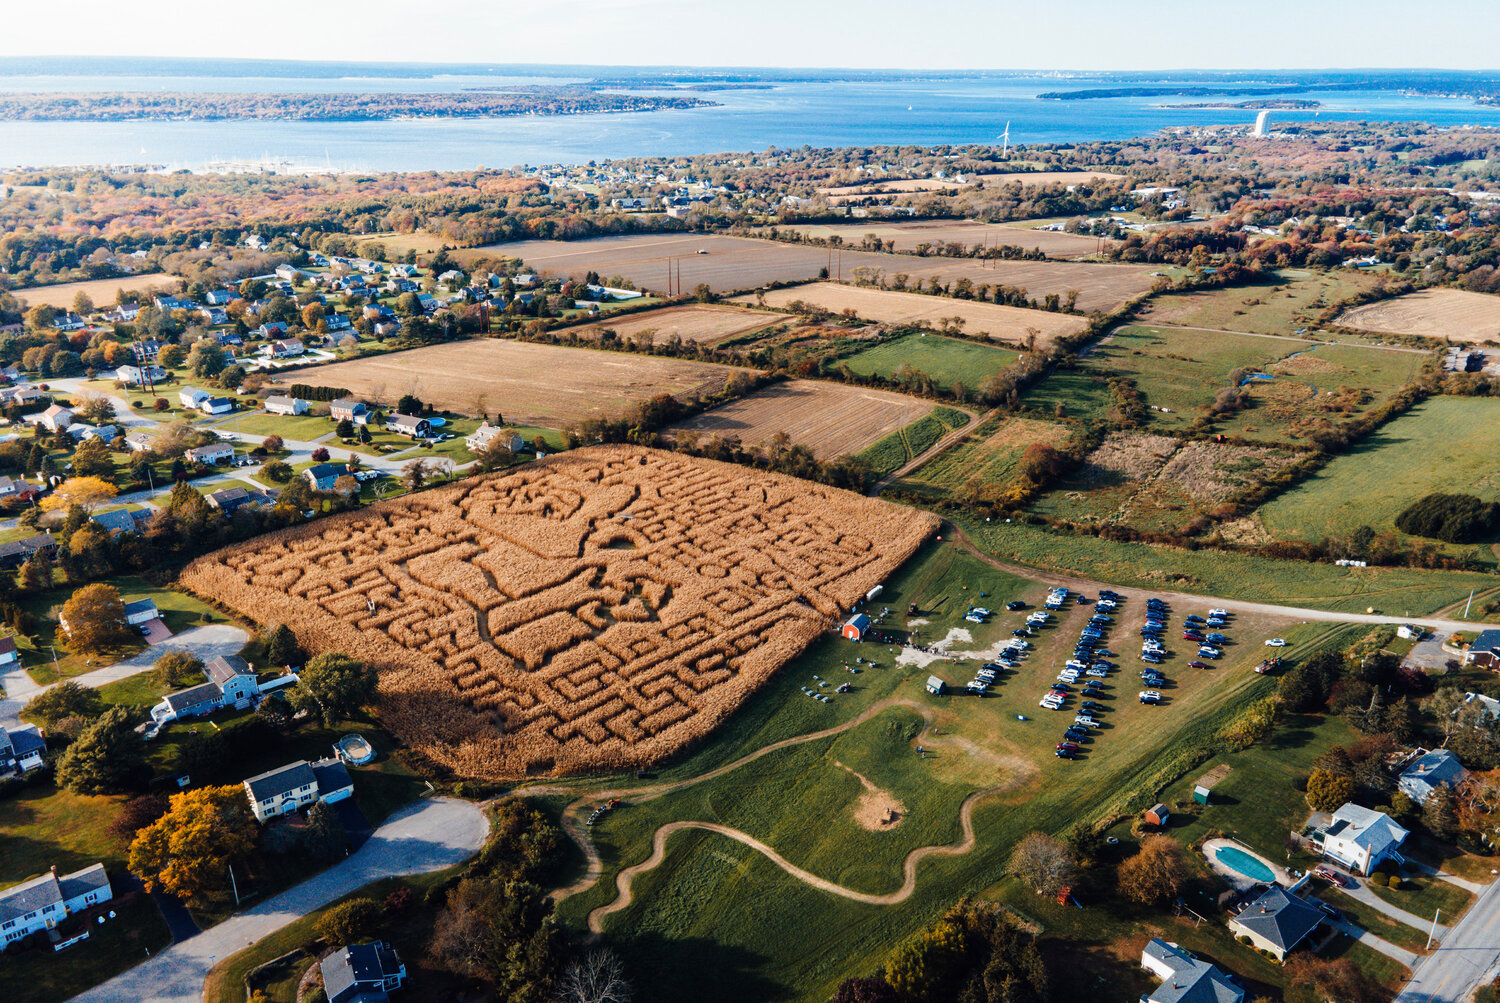 Watch for special events at Escobar Farm Corn Maze